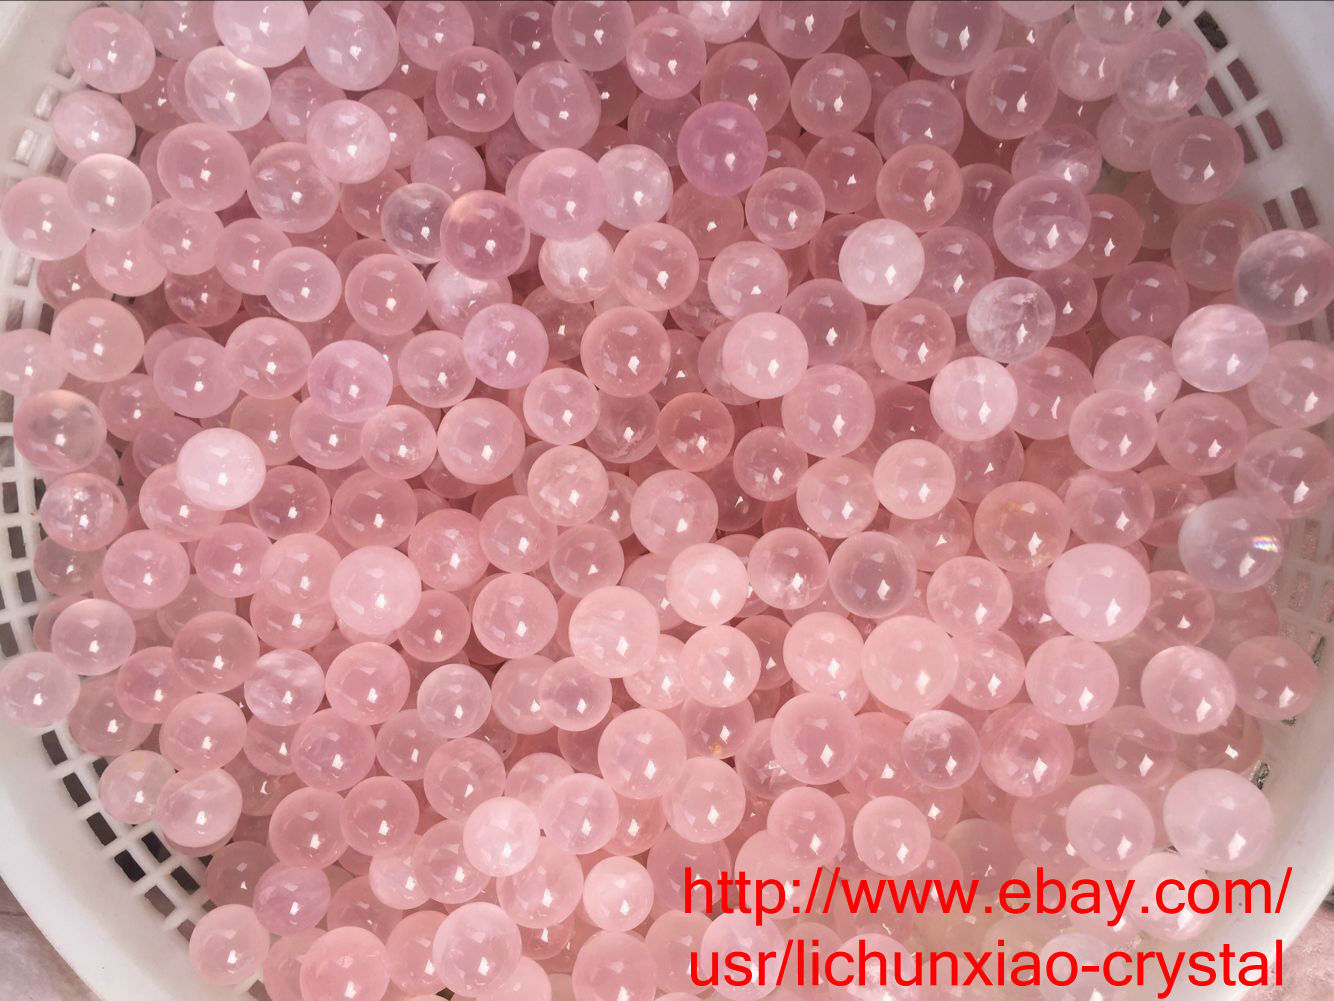 2.2lb wholesale Natural Mozambique ICY Rose Quartz Crystal Sphere Ball Healing